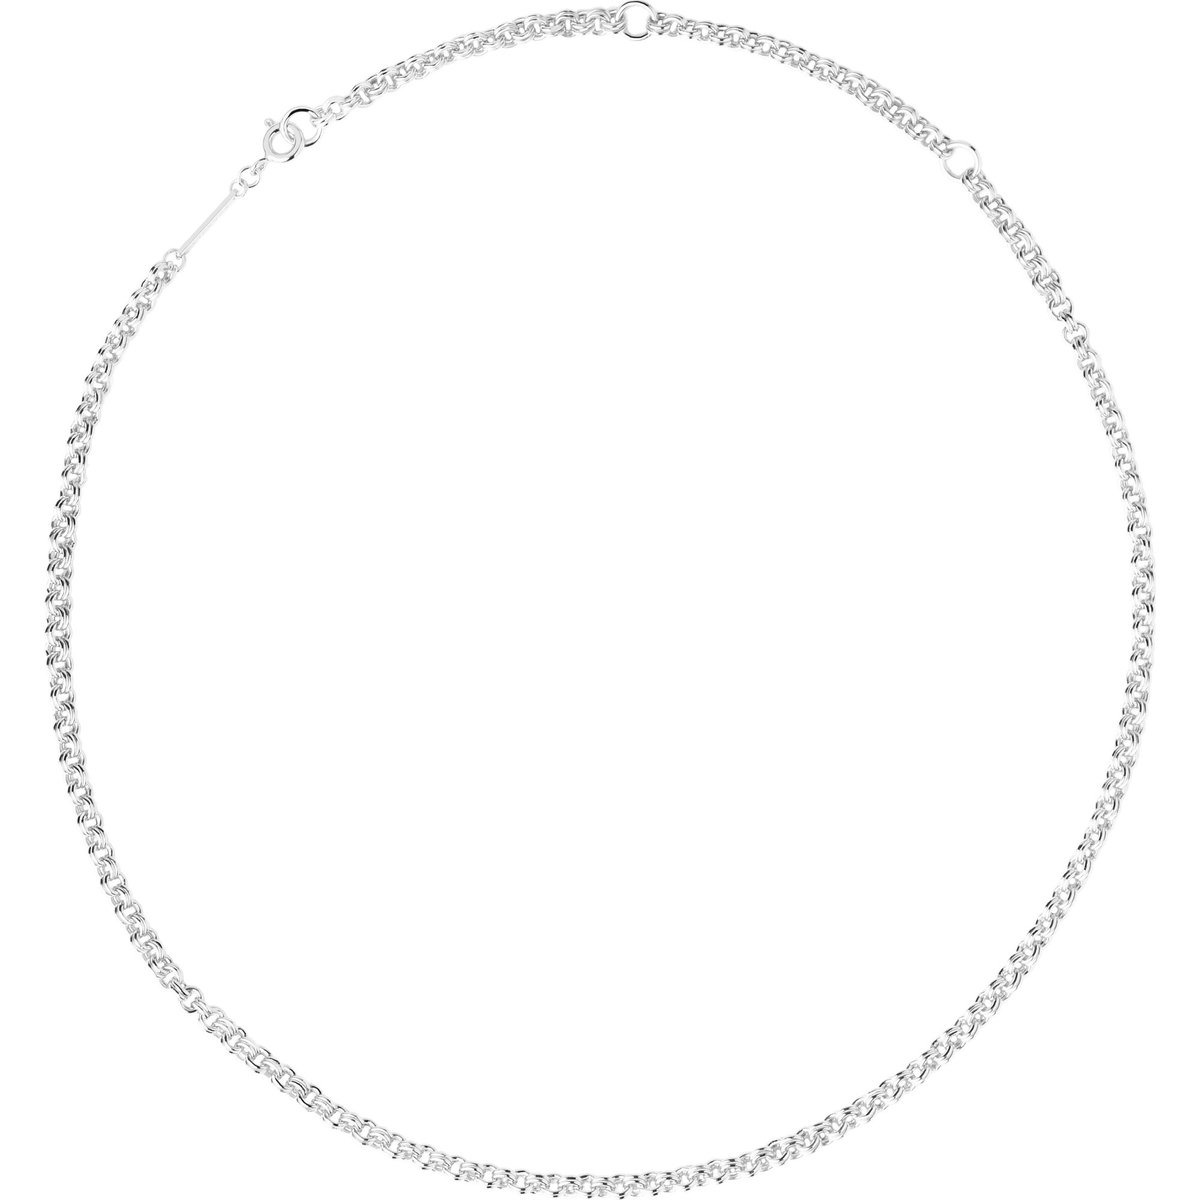 PD Paola Dames ketting 925 sterling zilver One Size Zilver 32019930